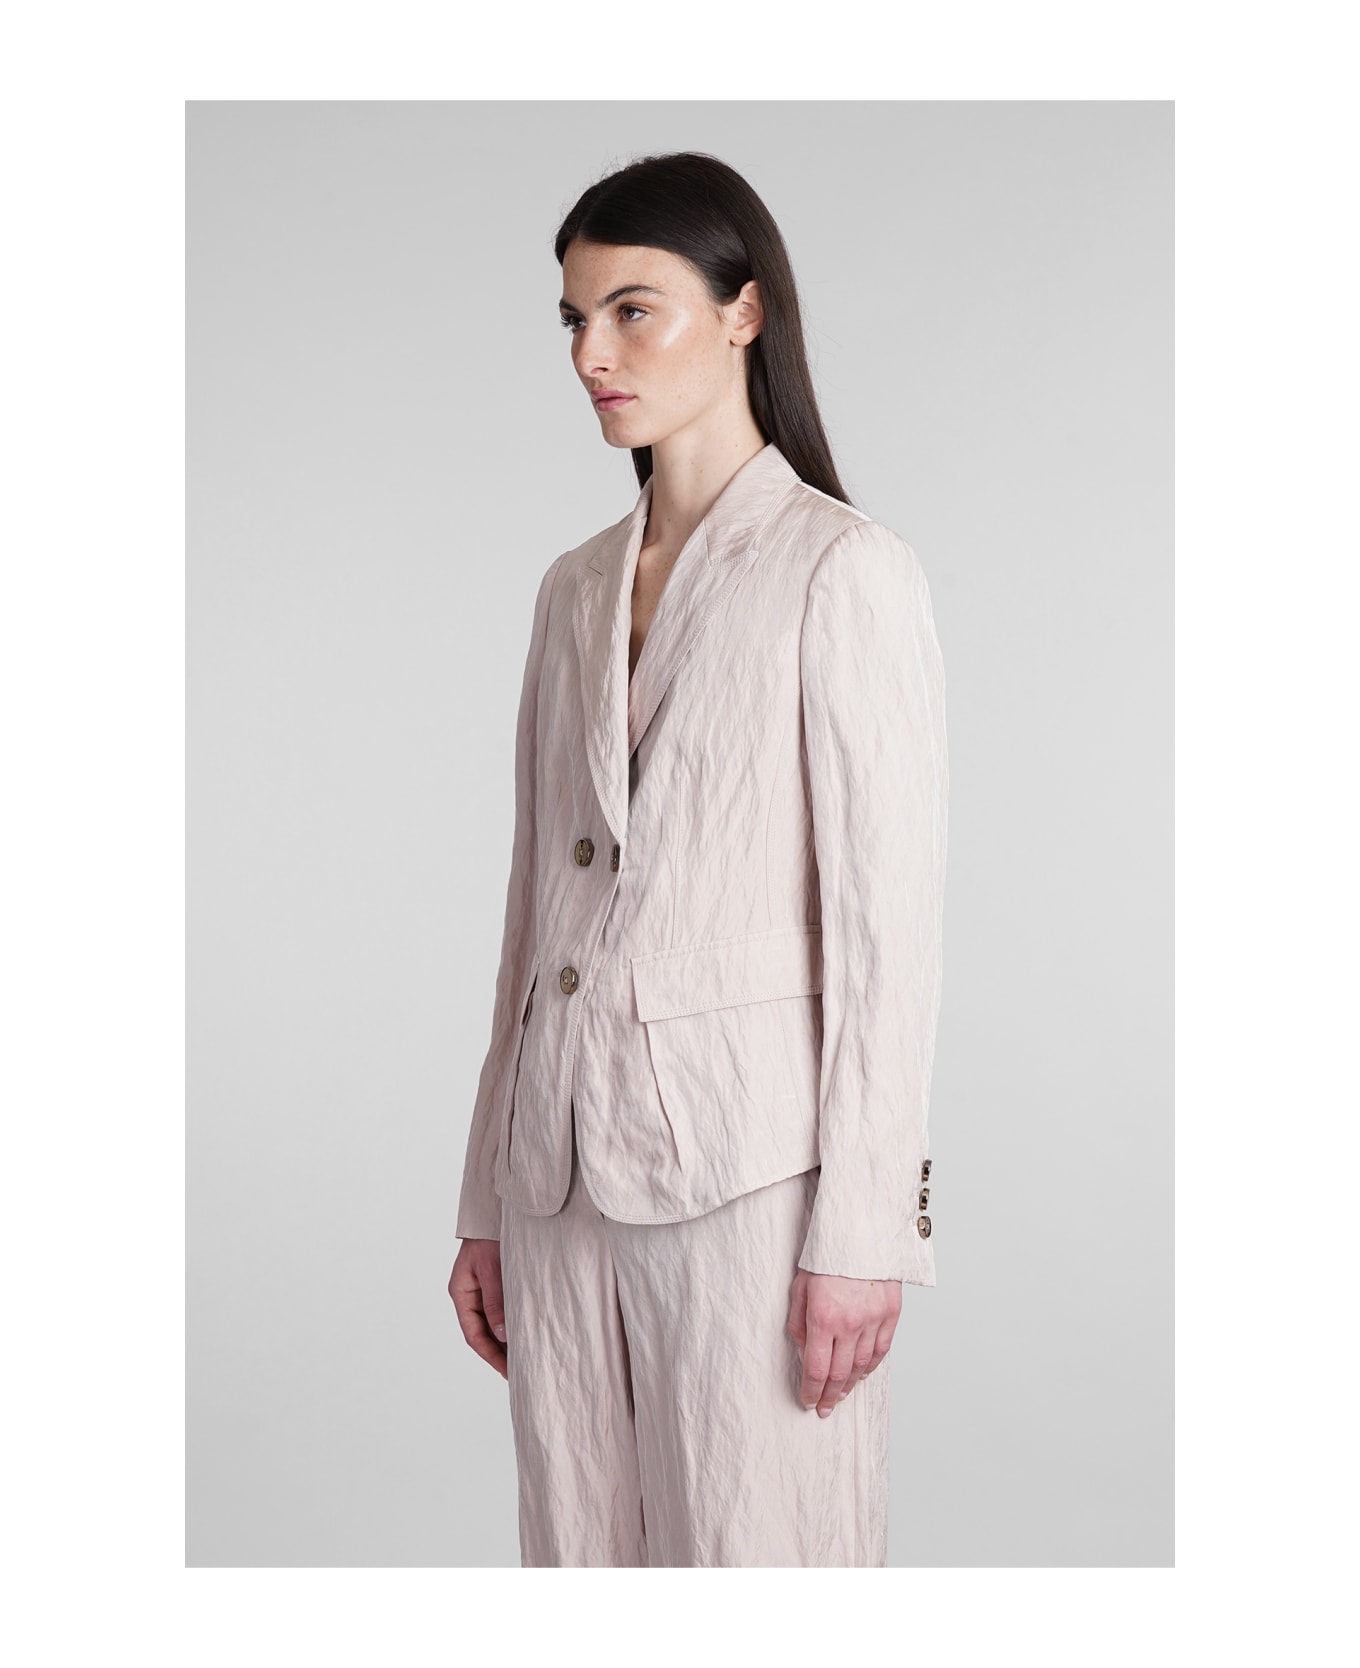 Giorgio Armani Double-breast Patched Pocket Blazer - rose-pink